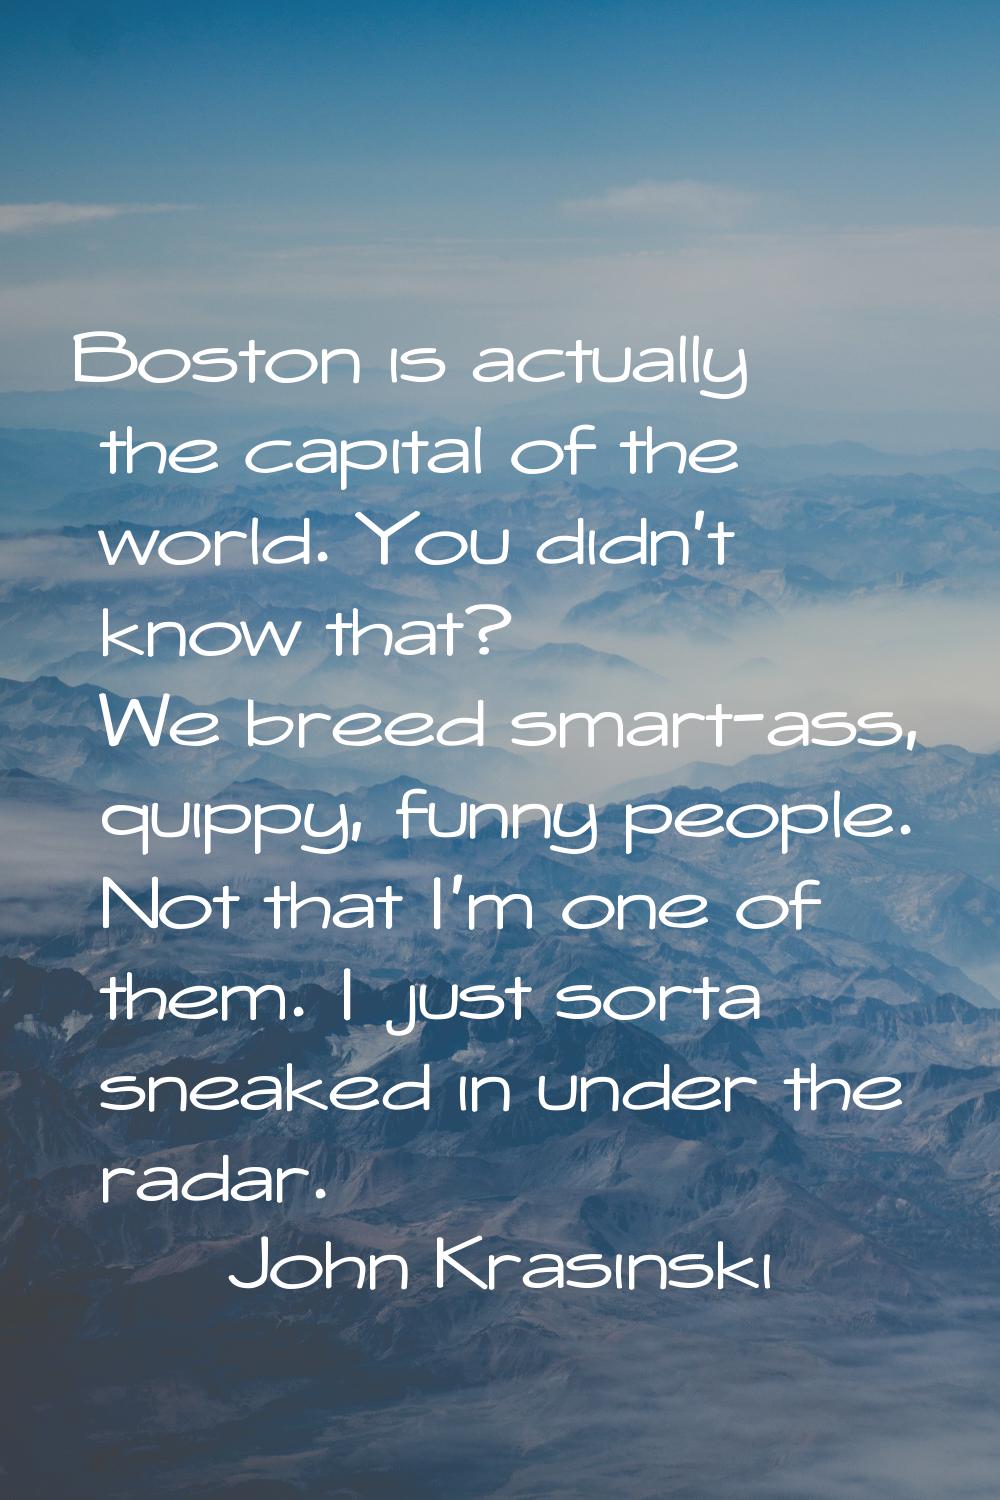 Boston is actually the capital of the world. You didn't know that? We breed smart-ass, quippy, funn